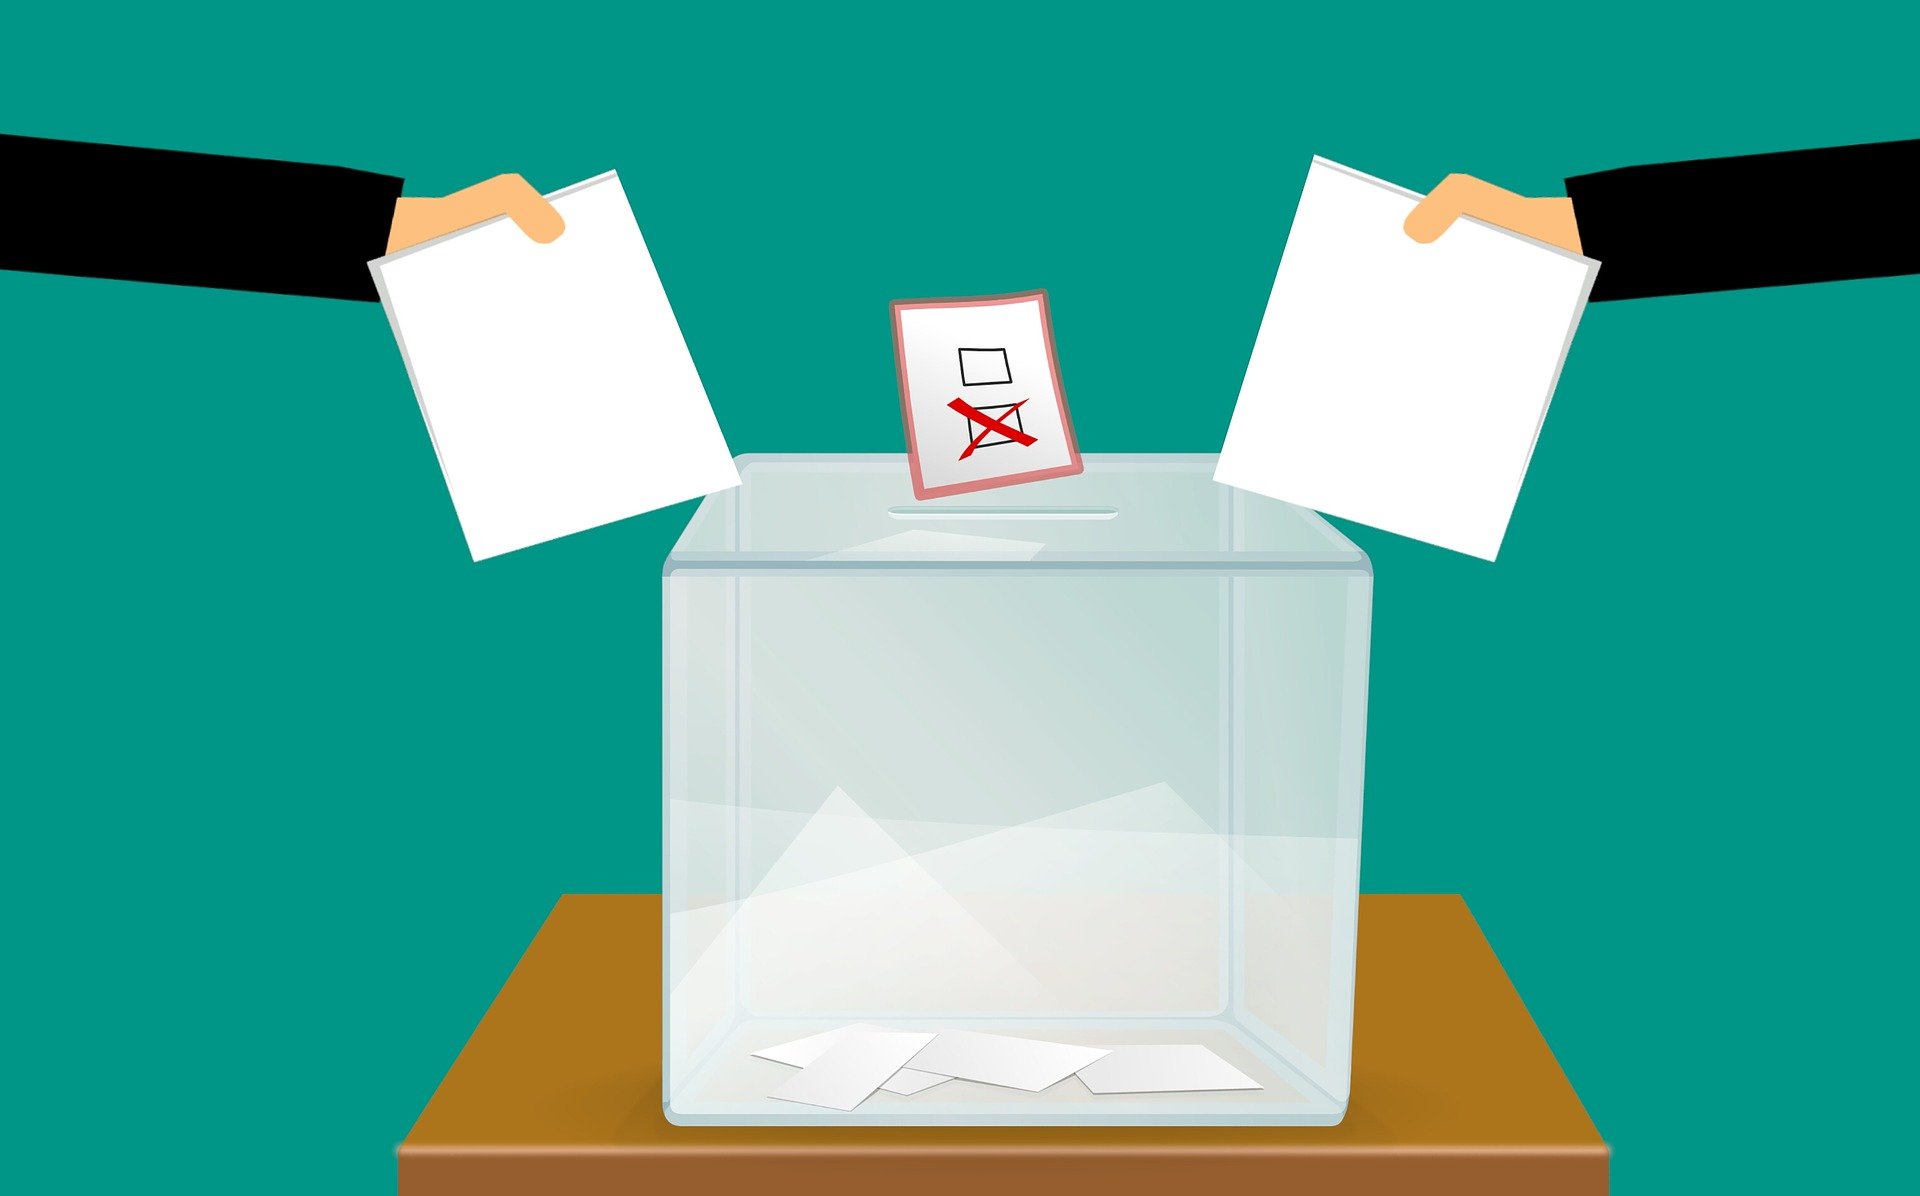 Two hands holding pieces of paper above a ballot box